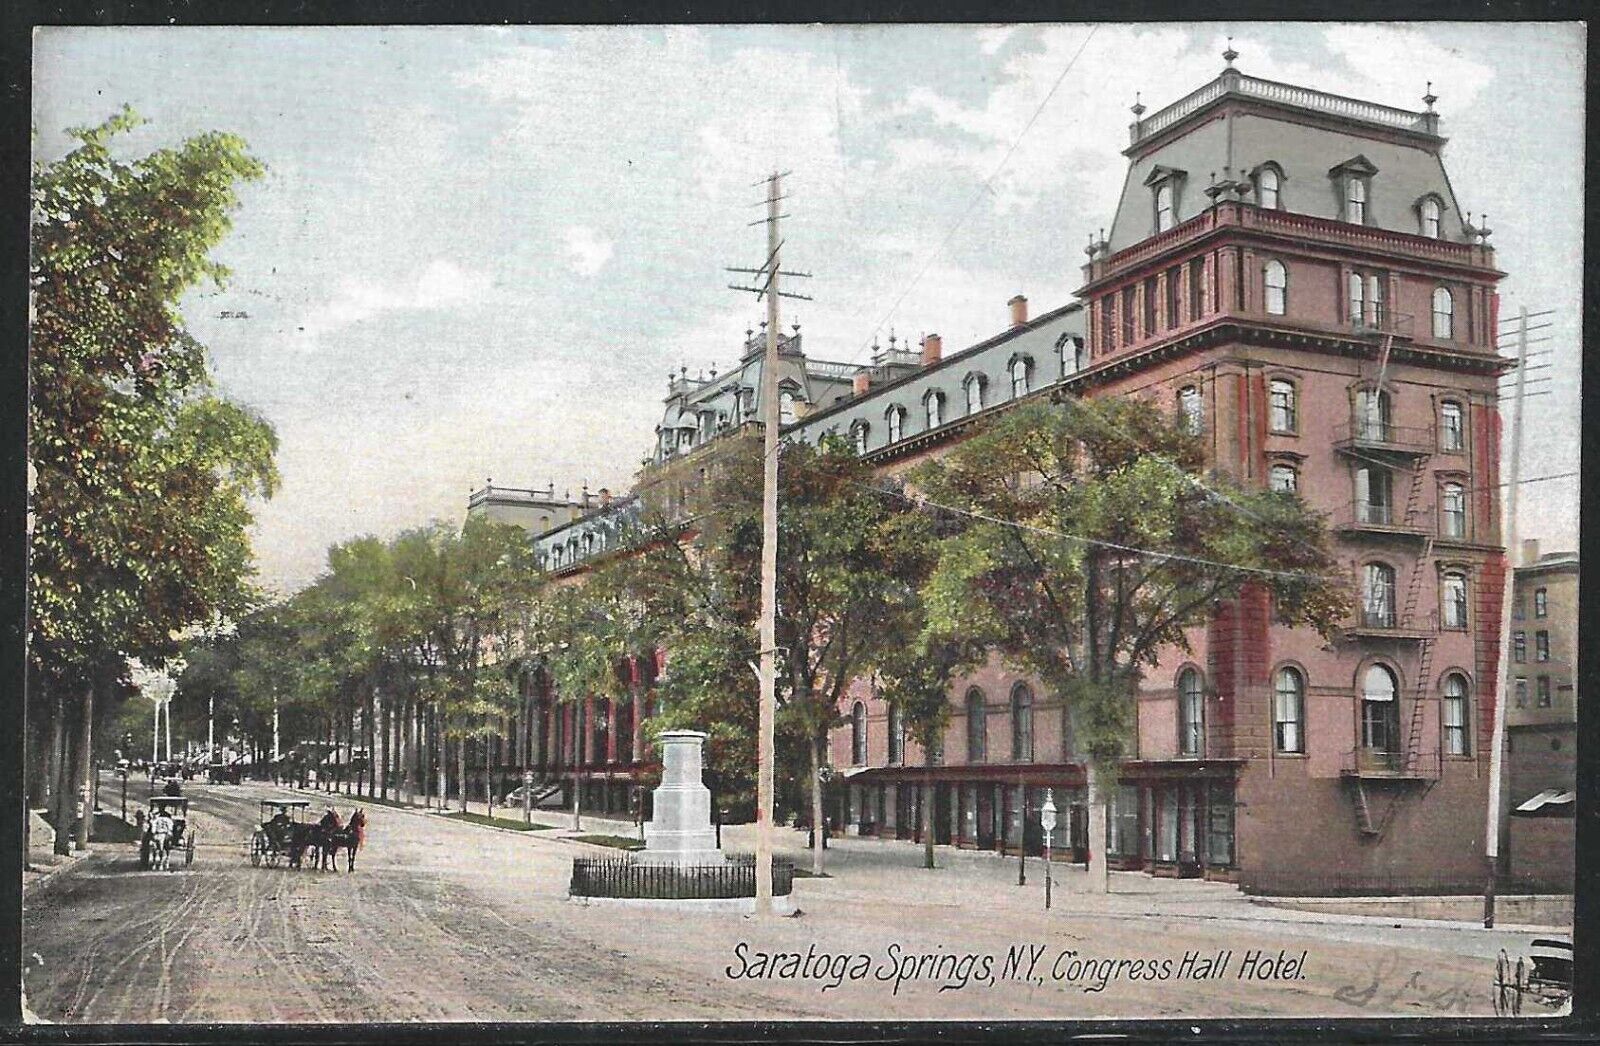 Congress Hall Hotel, Saratoga Springs, N.Y., Very Early Postcard, Used in 1907